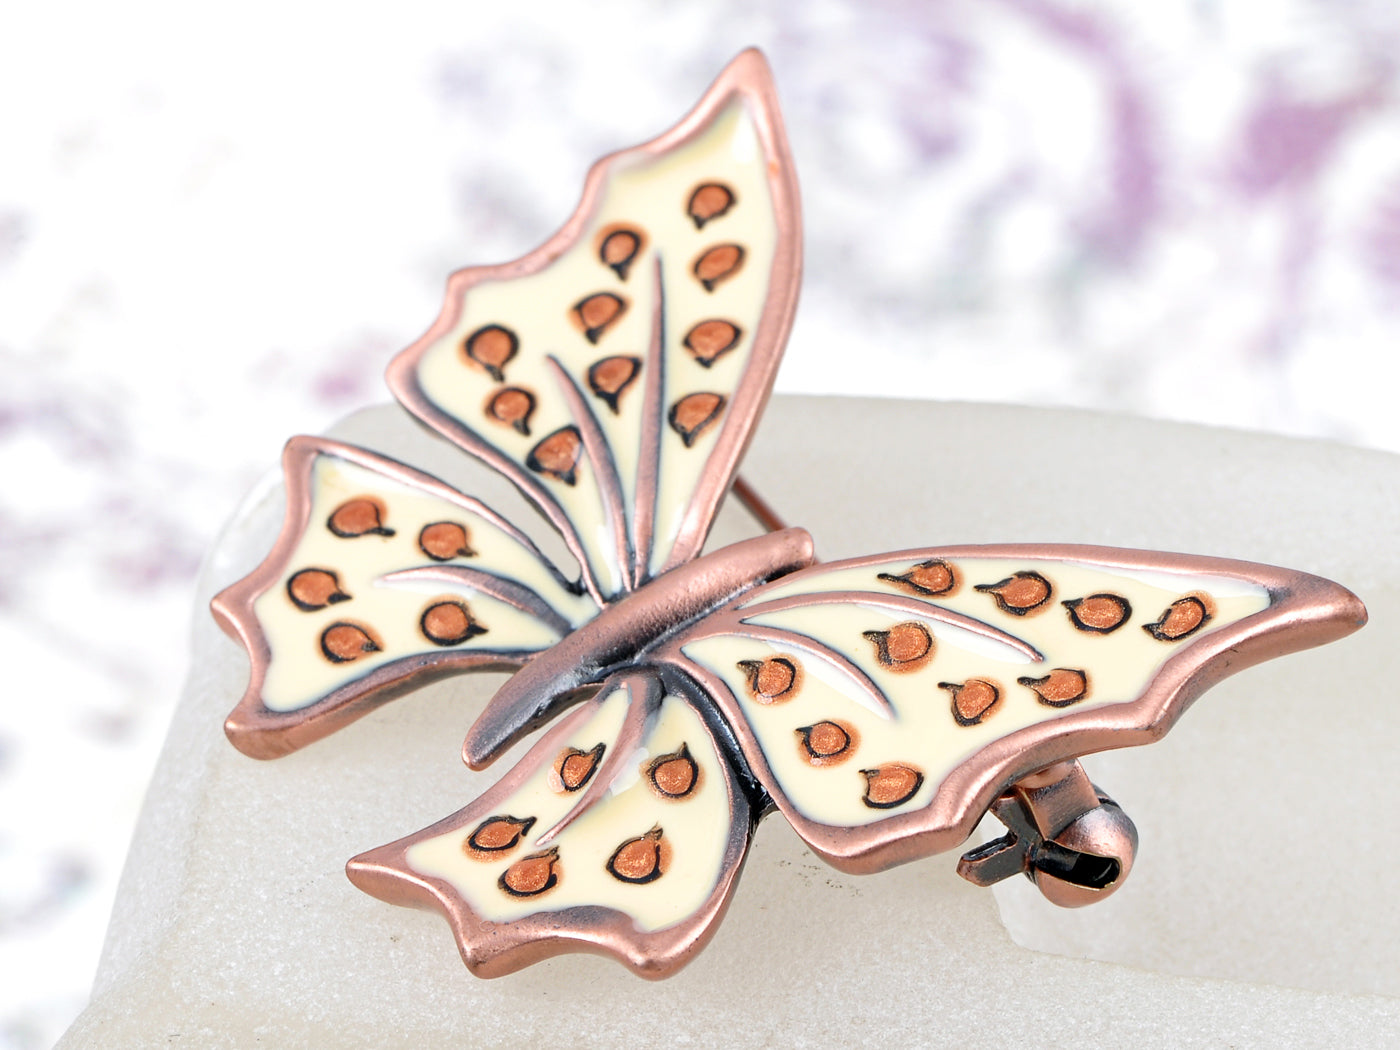 Elements Old Rose Speckled Butterfly Pin Brooch